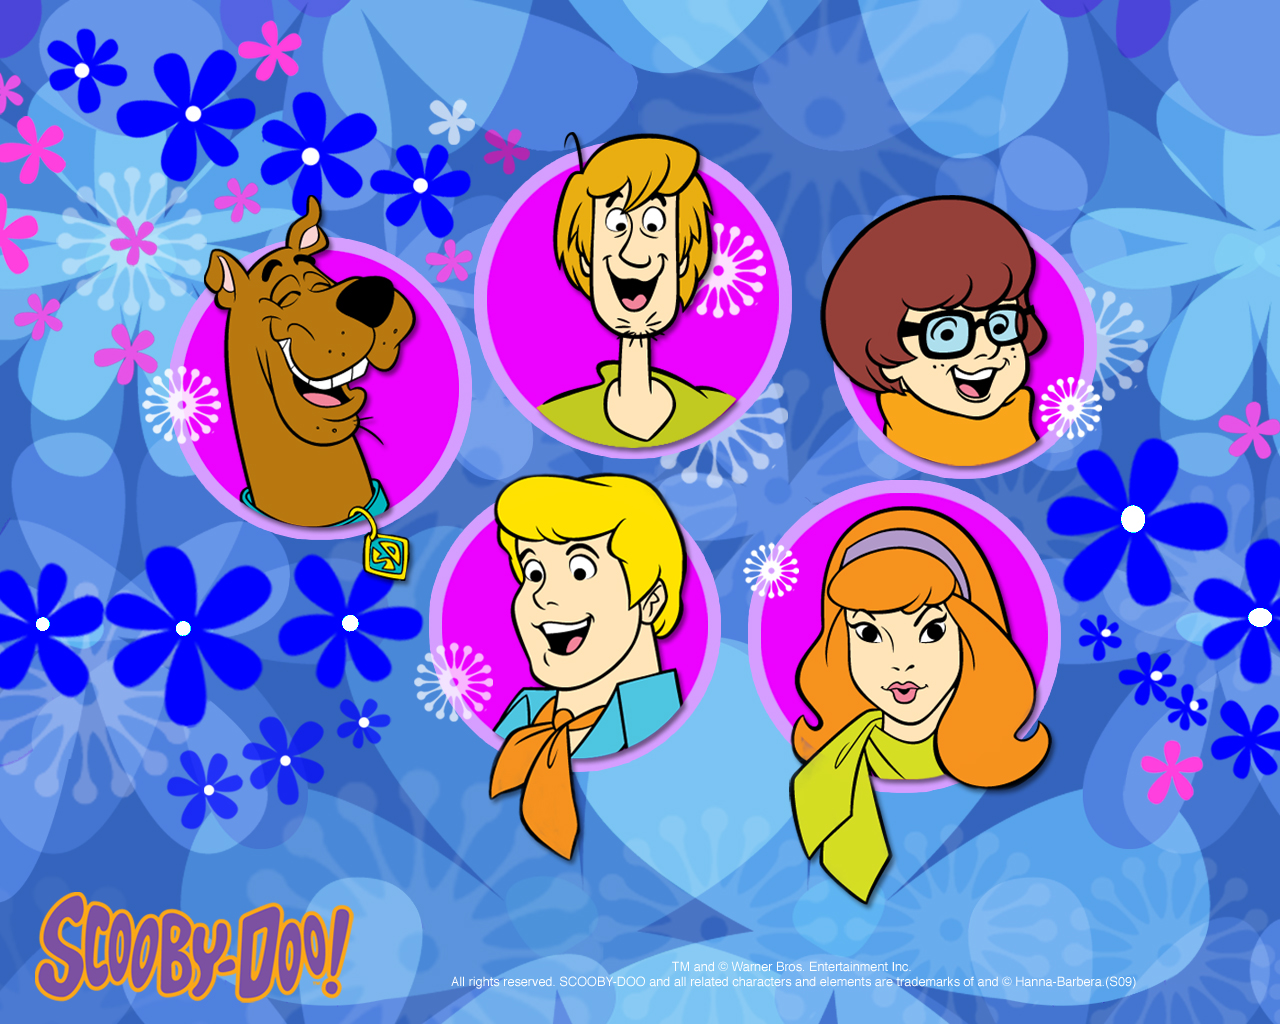 Of Scooby Doo Wallpaper Android Border